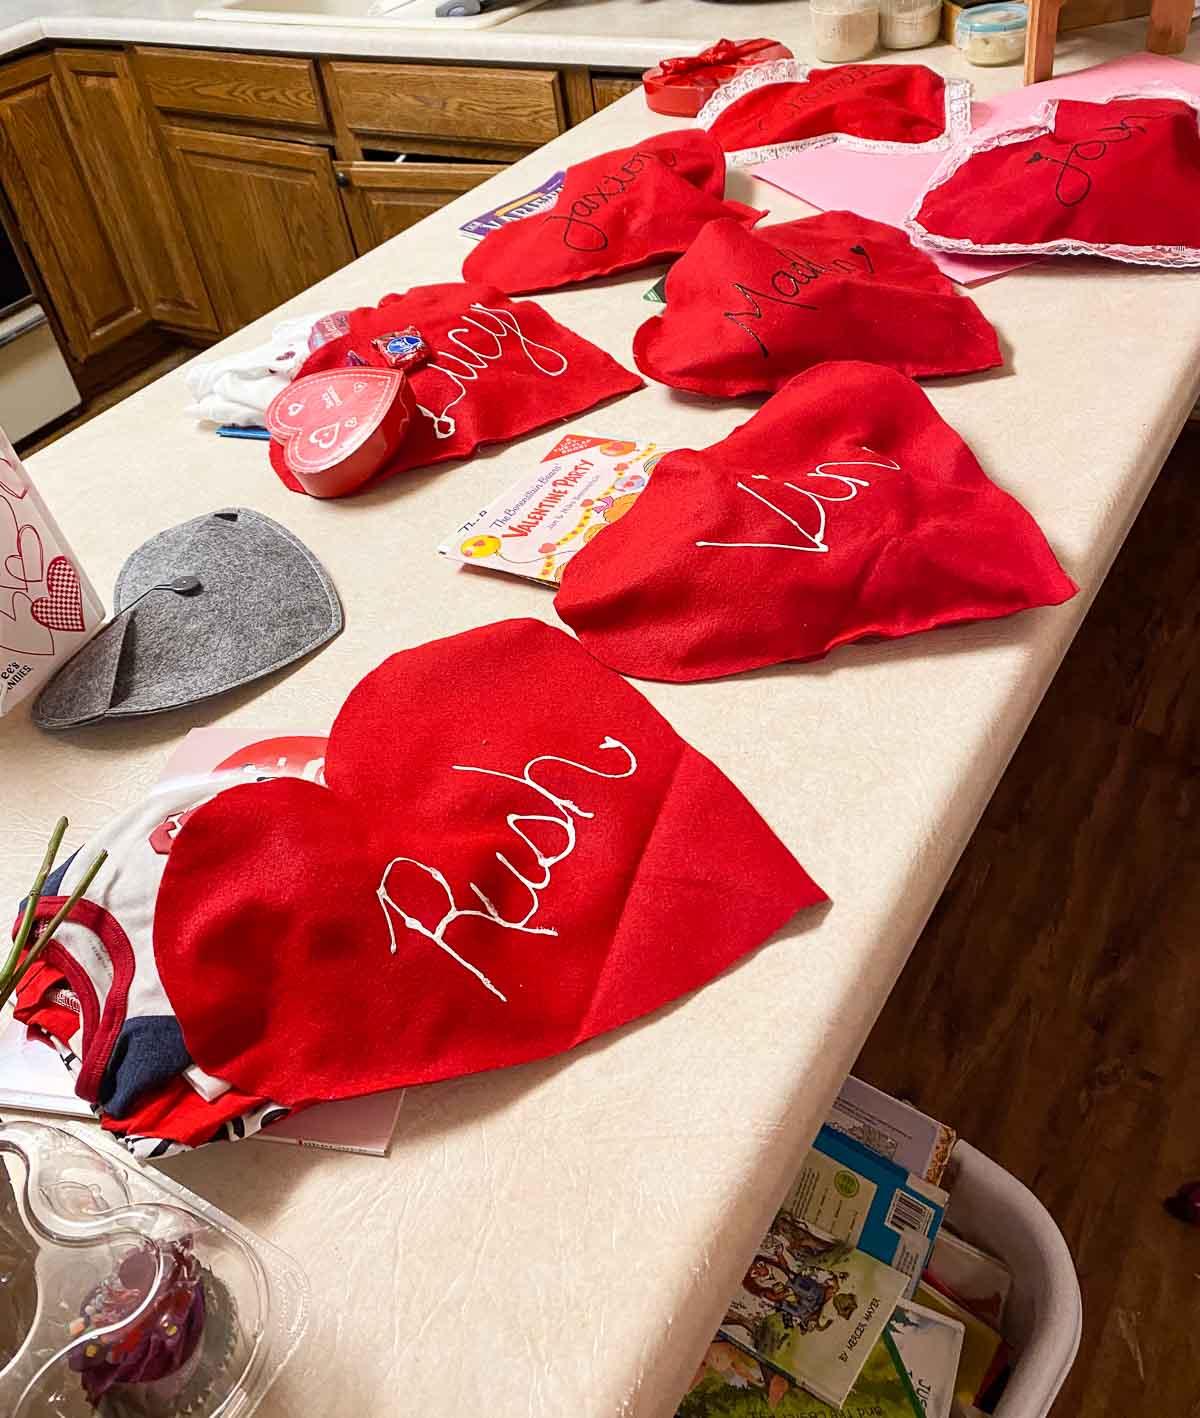 Felt Valentine Hearts Tradition stuffed with gifts